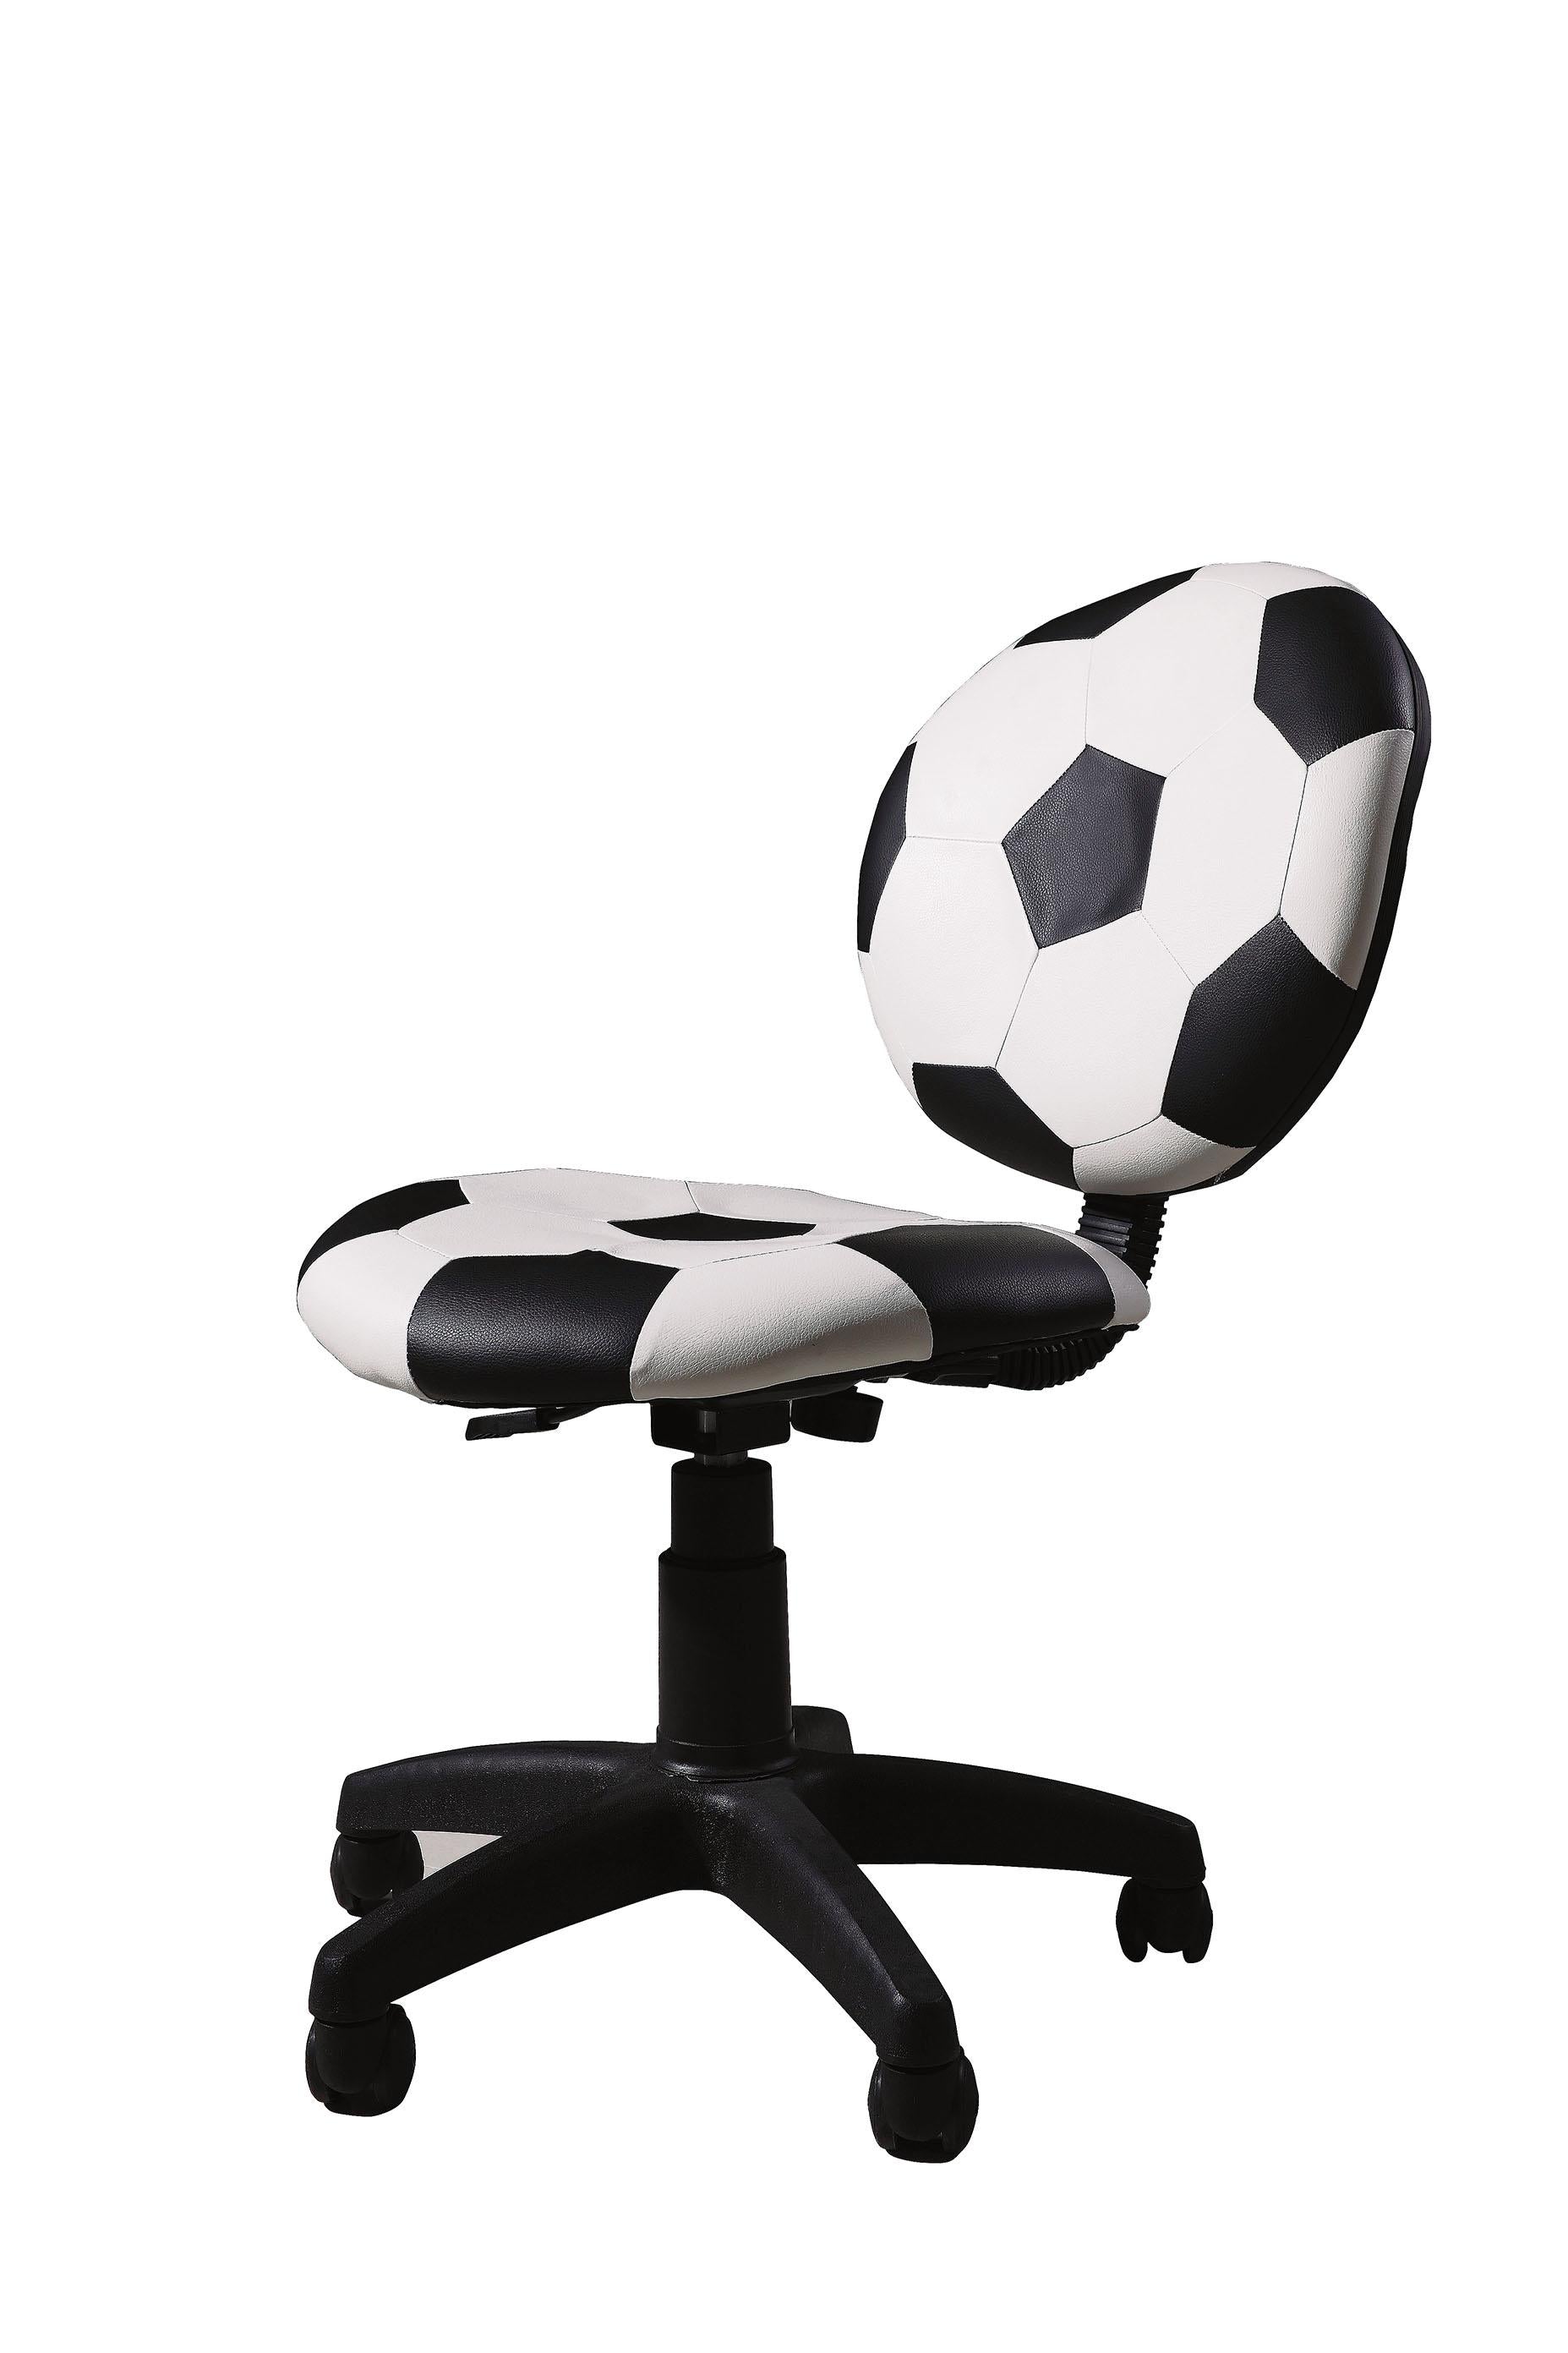 Youth Office Chair With Pneumatic Lift Soccerball - Pu Plastic Foam Soccerball : Black  White